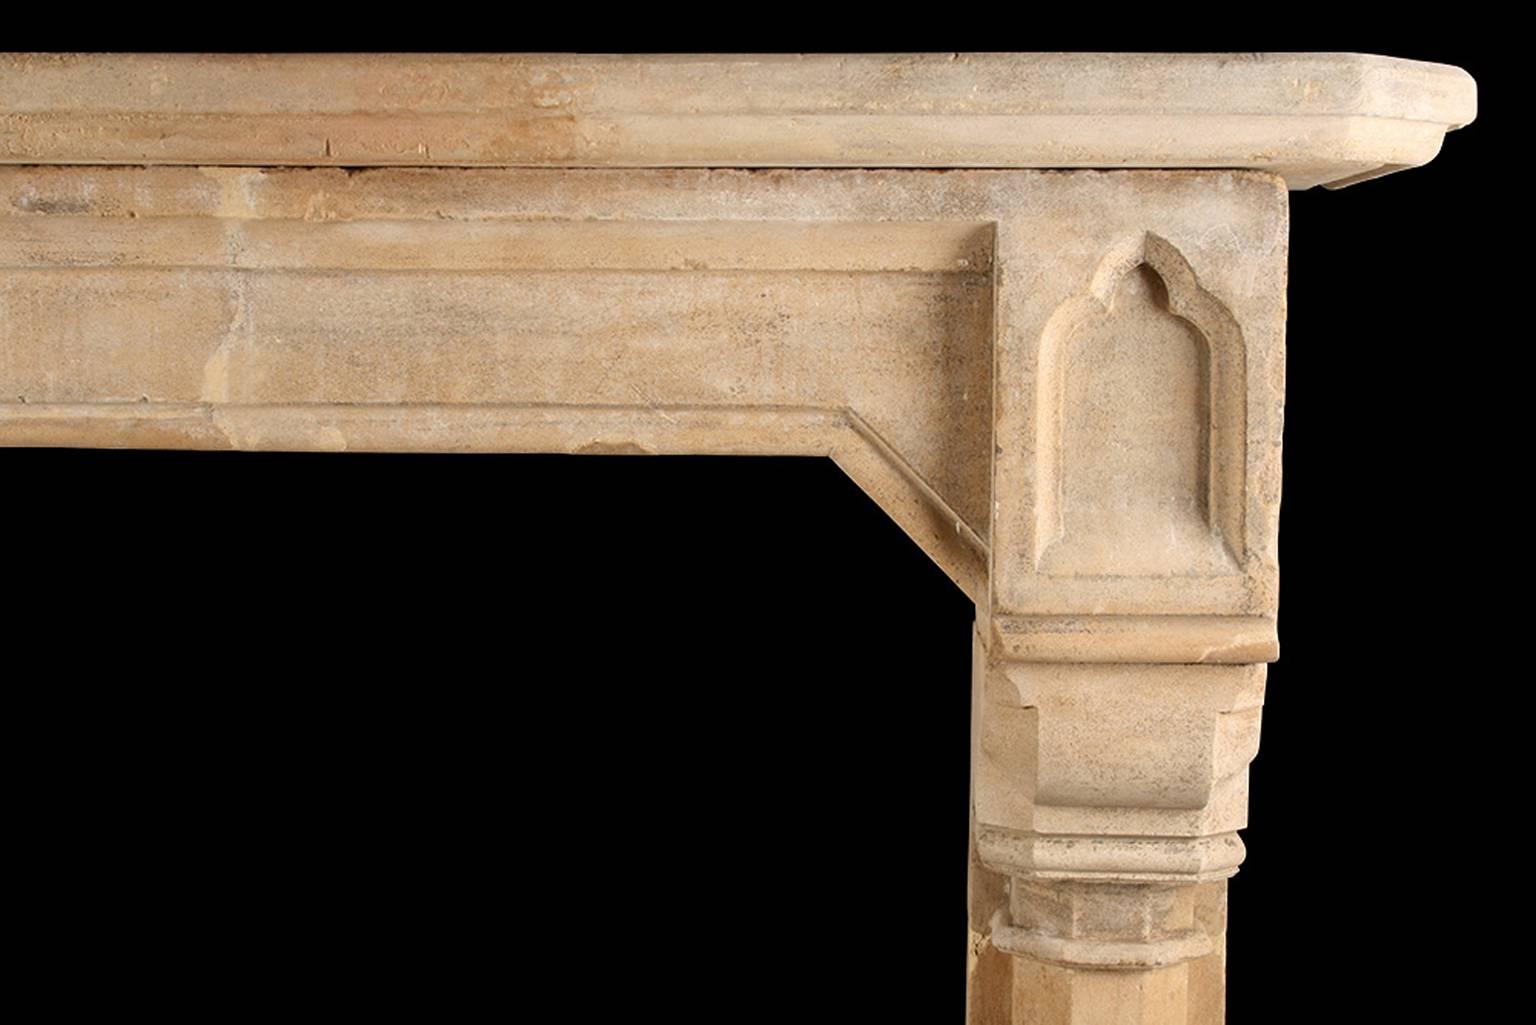 Antique Gothic Tudor Revival chimneypiece.

An outstanding antique Victorian Gothic Tudor Revival chimneypiece in English bathstone with attractively shaped mouldings, English, 19th century.

Depth: 14 1/2